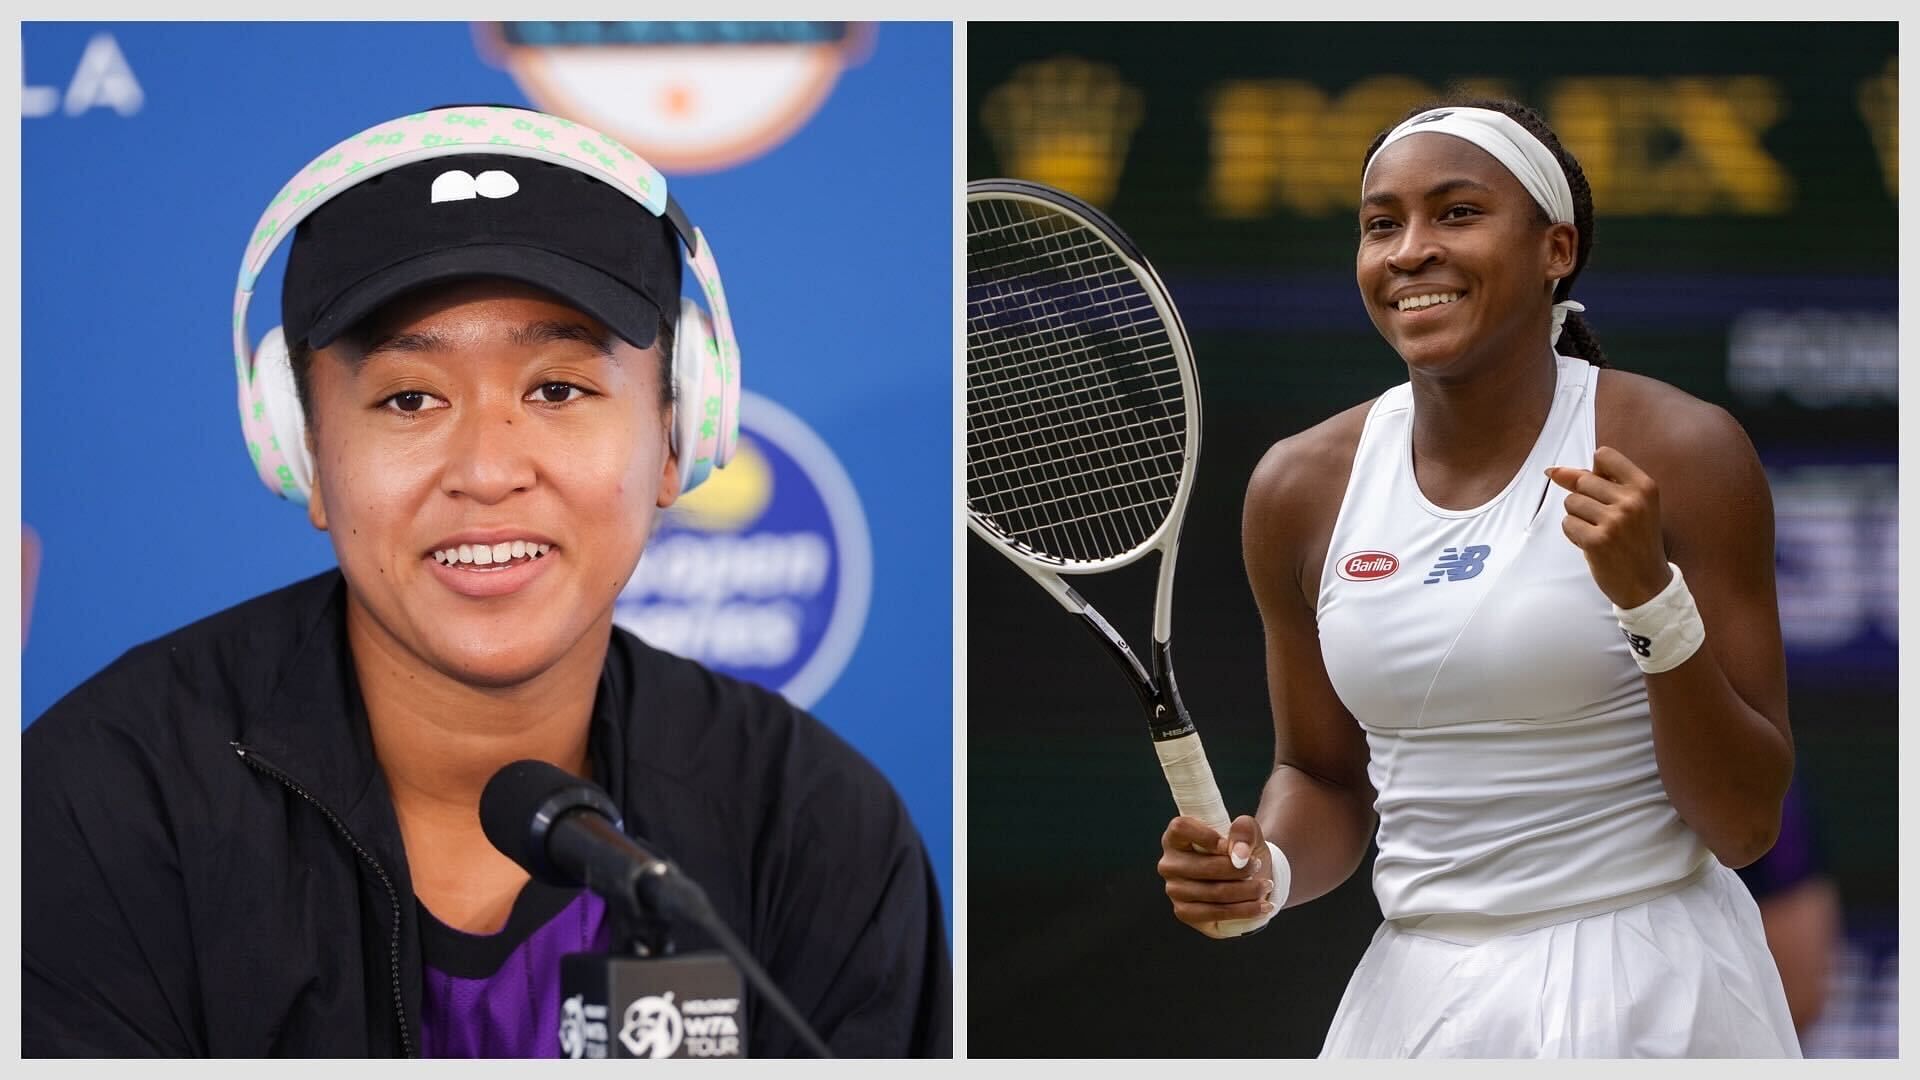 Naomi Osaka wants to be on-court 'role model' after improving